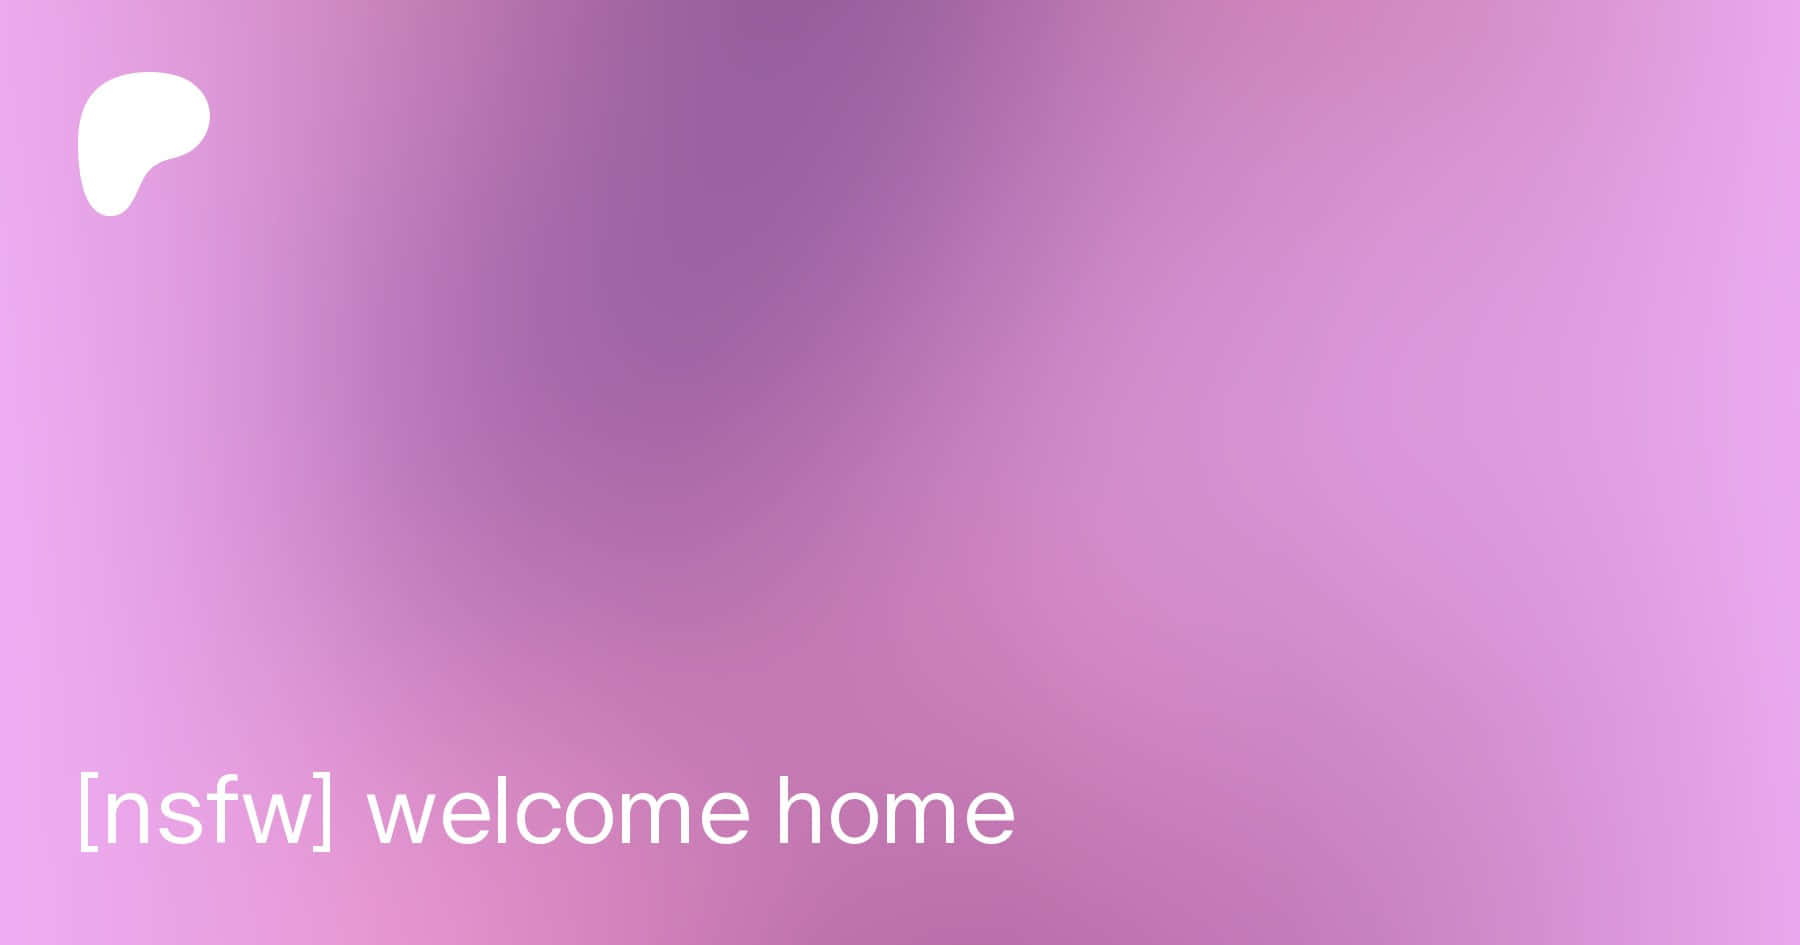 Welcome Home Purple Gradient Background Wallpaper